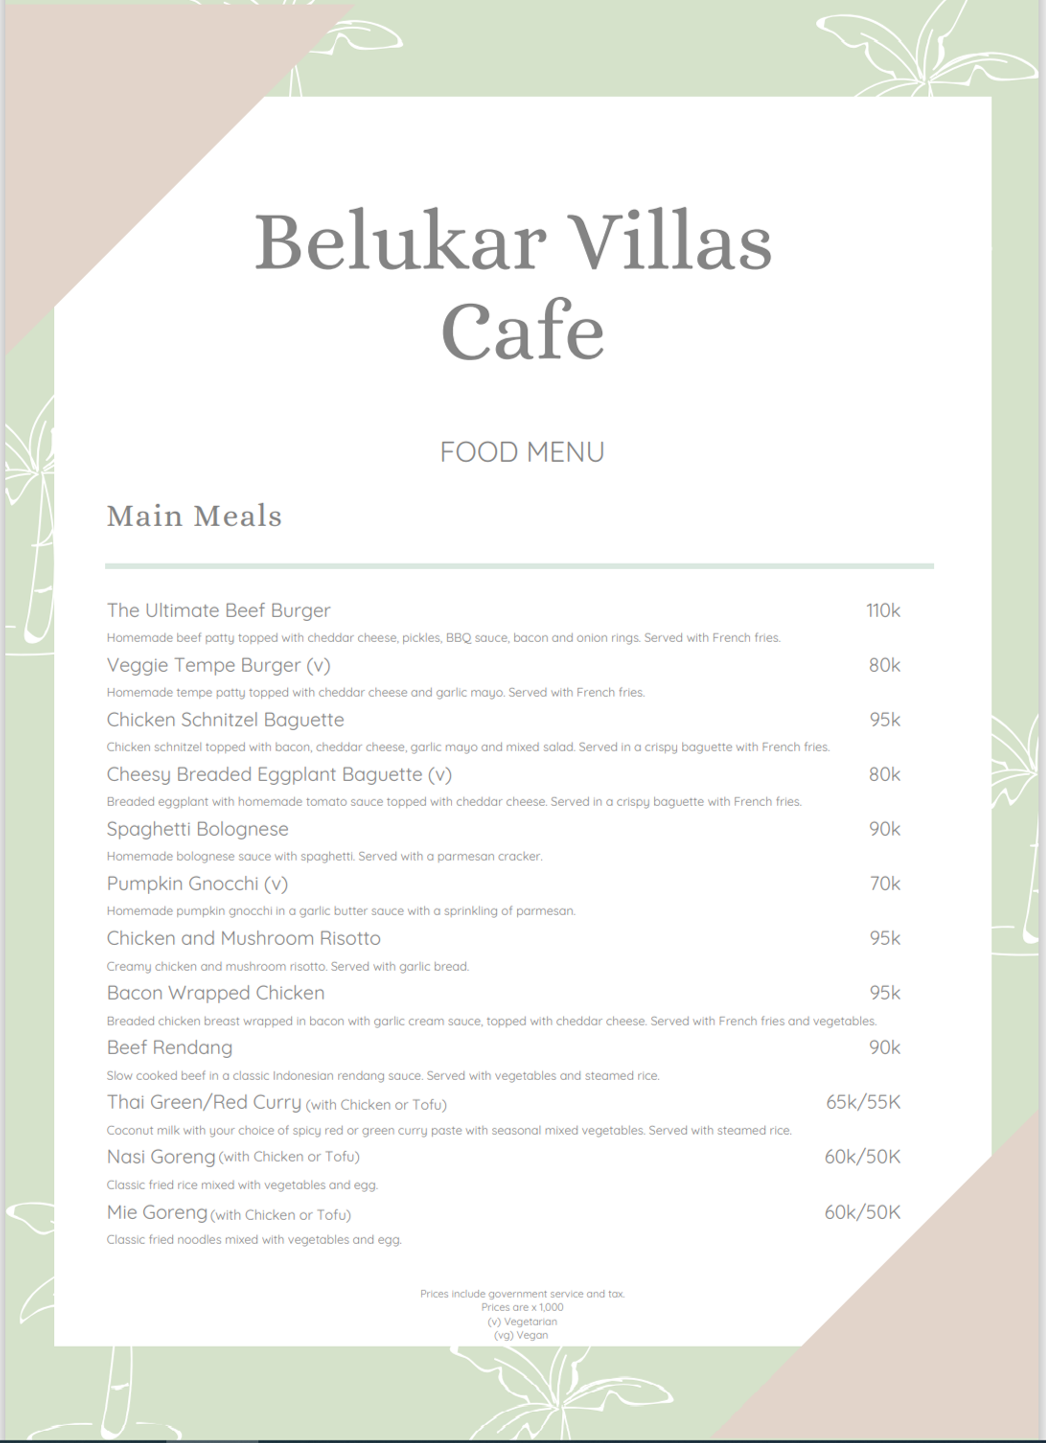 https://cloudmixer.gracepl.us/sites/belukarvillas.com/files/pictures/Cafe%20and%20menu/Cafe%20page%202